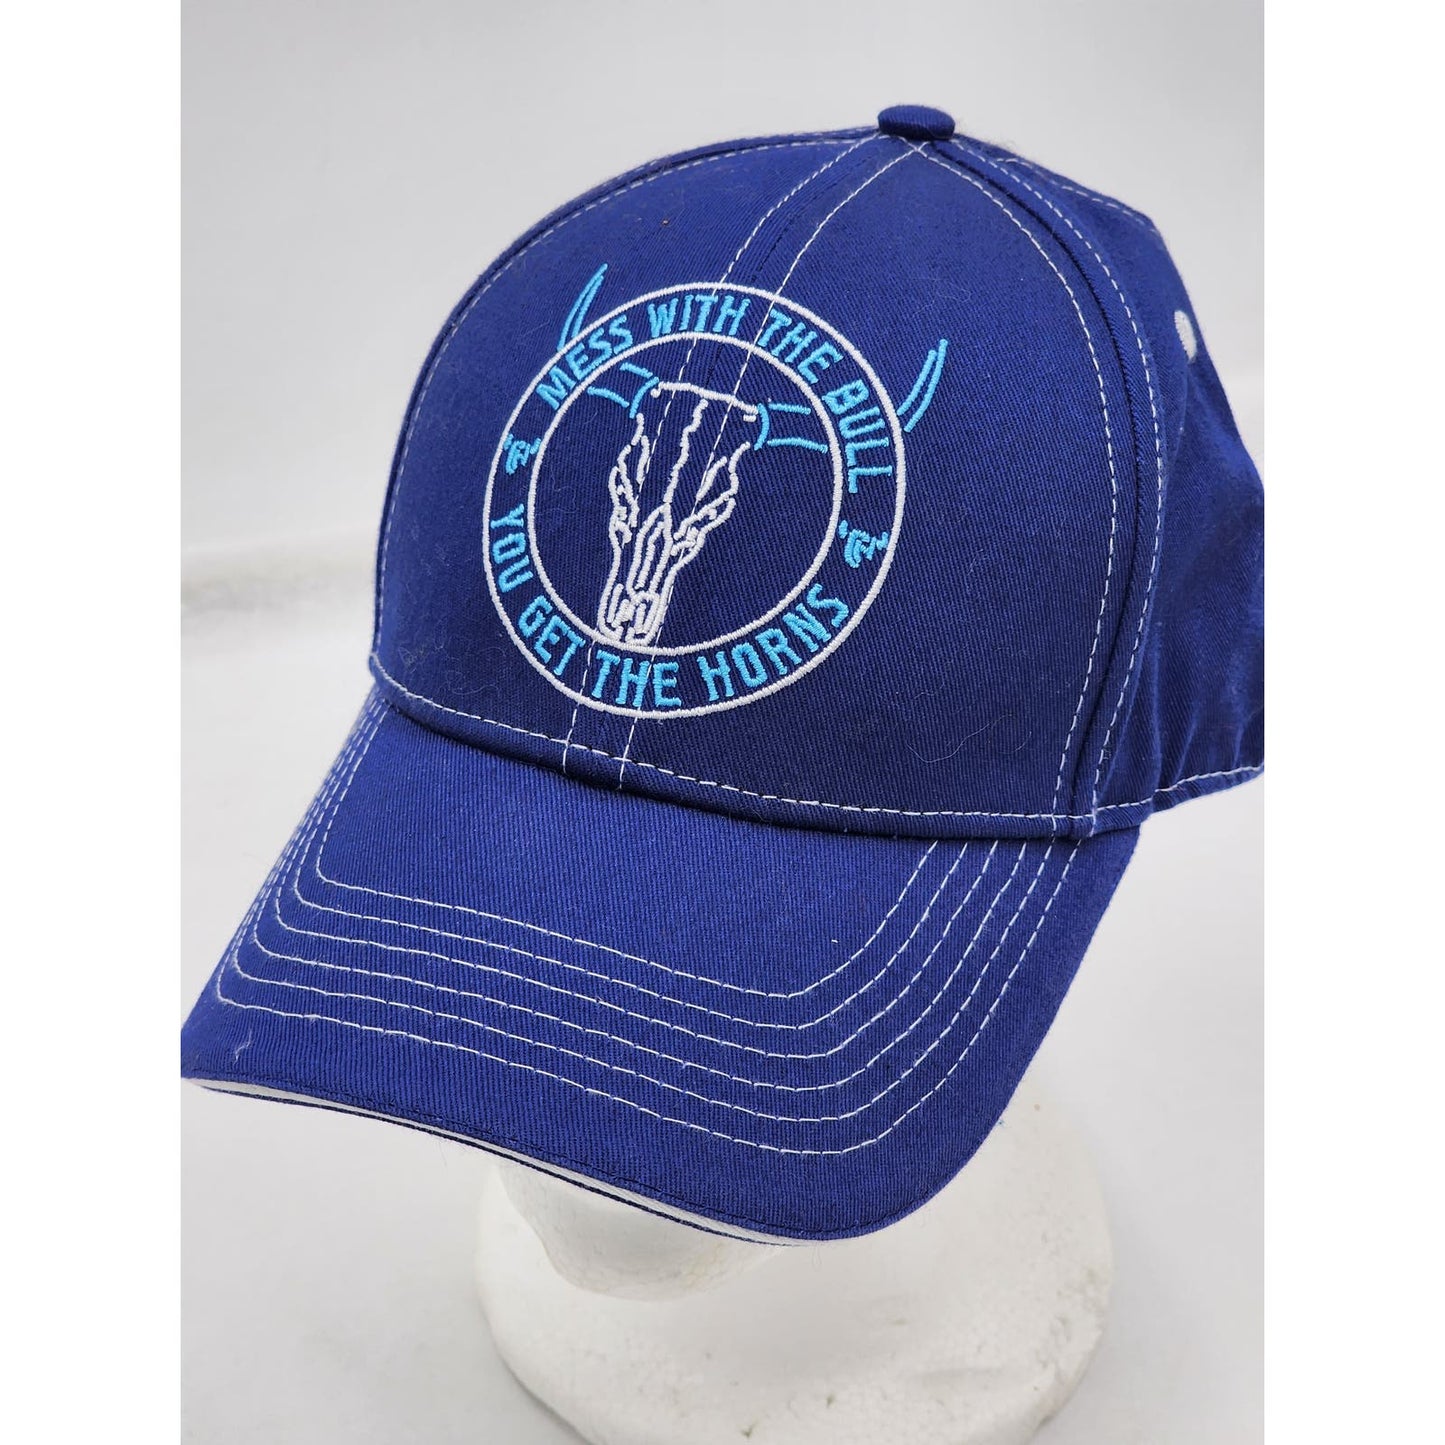 Cowboy Hardware Mess With Bull You Get Horn Hat Blue Cotton Snapback Trucker Cap